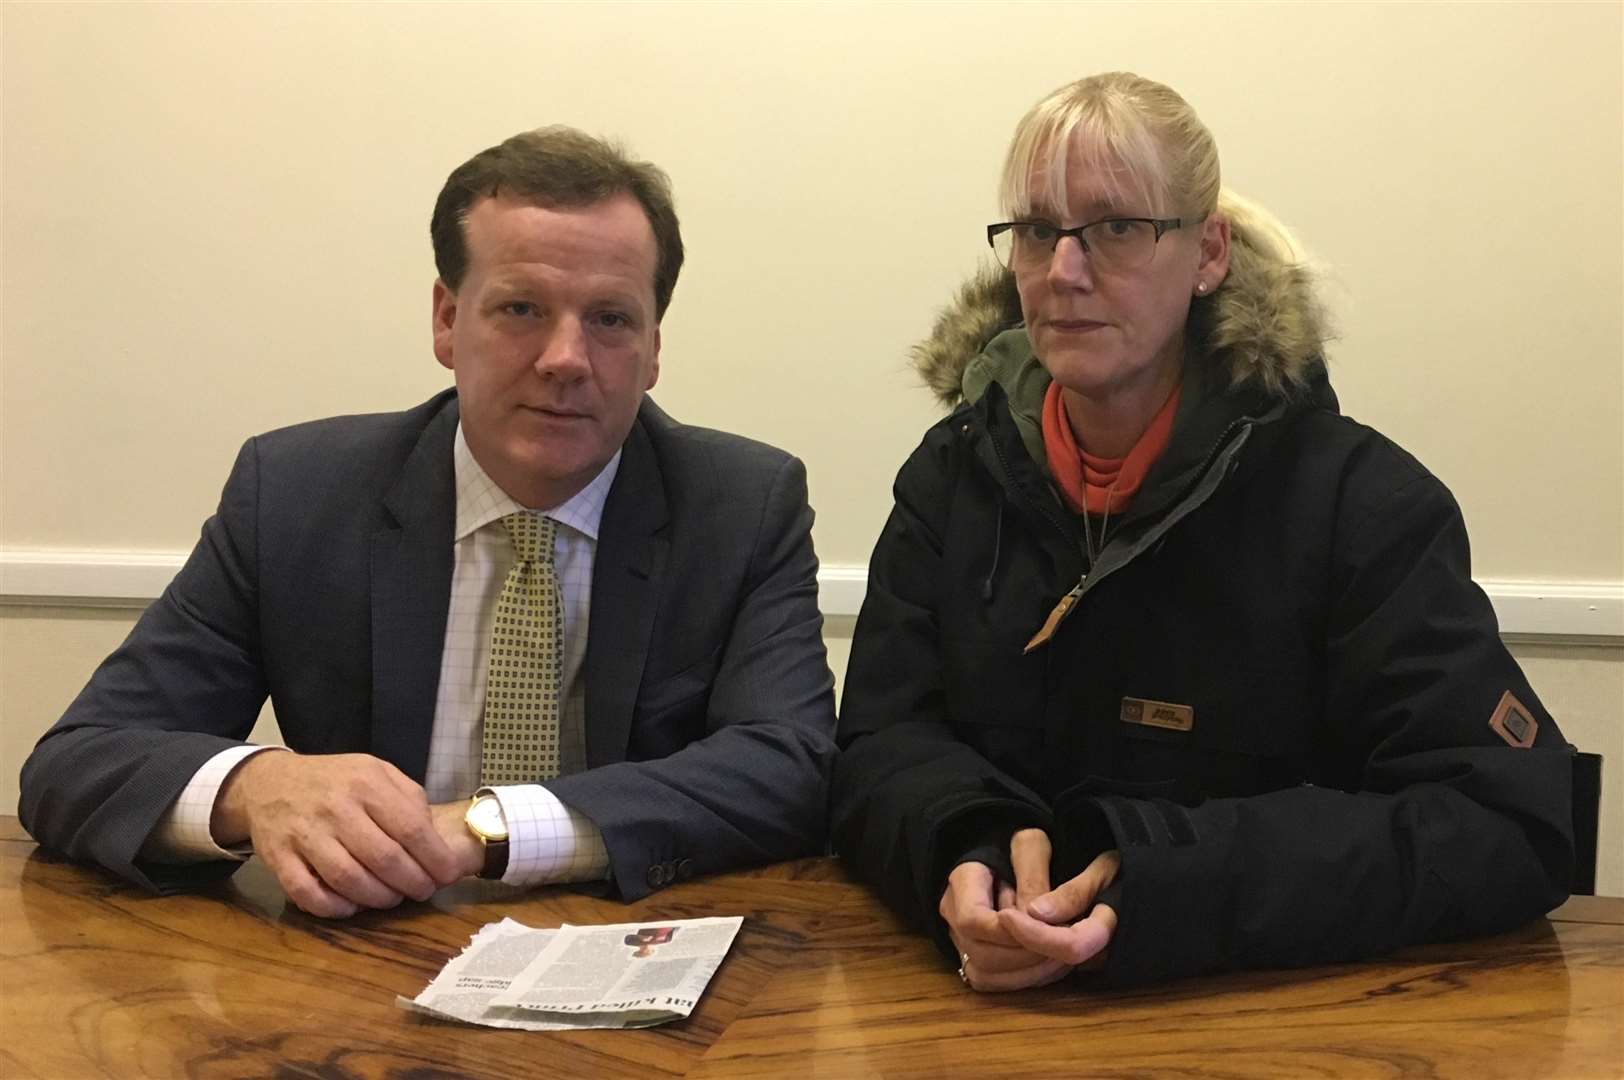 MP Charlie Elphicke and Michelle Parry are fighting to bring in tougher sentences for people caught supplying fentanyl